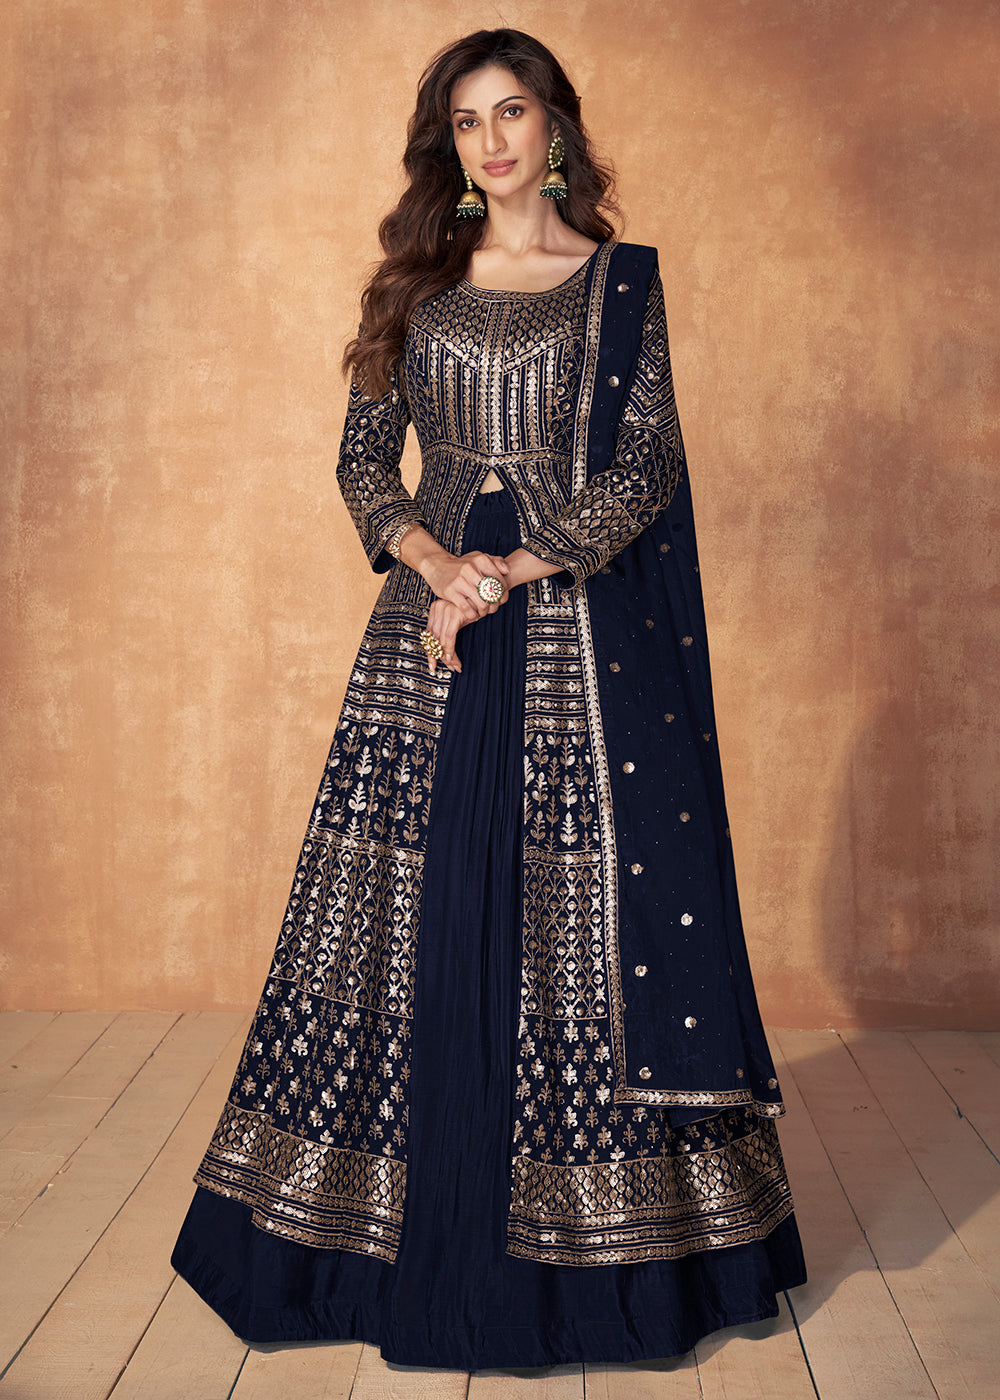 Buy Now Navy Blue Skirt Style Embroidered Wedding Anarkali Suit Online in USA, UK, Australia, New Zealand, Canada & Worldwide at Empress Clothing. 